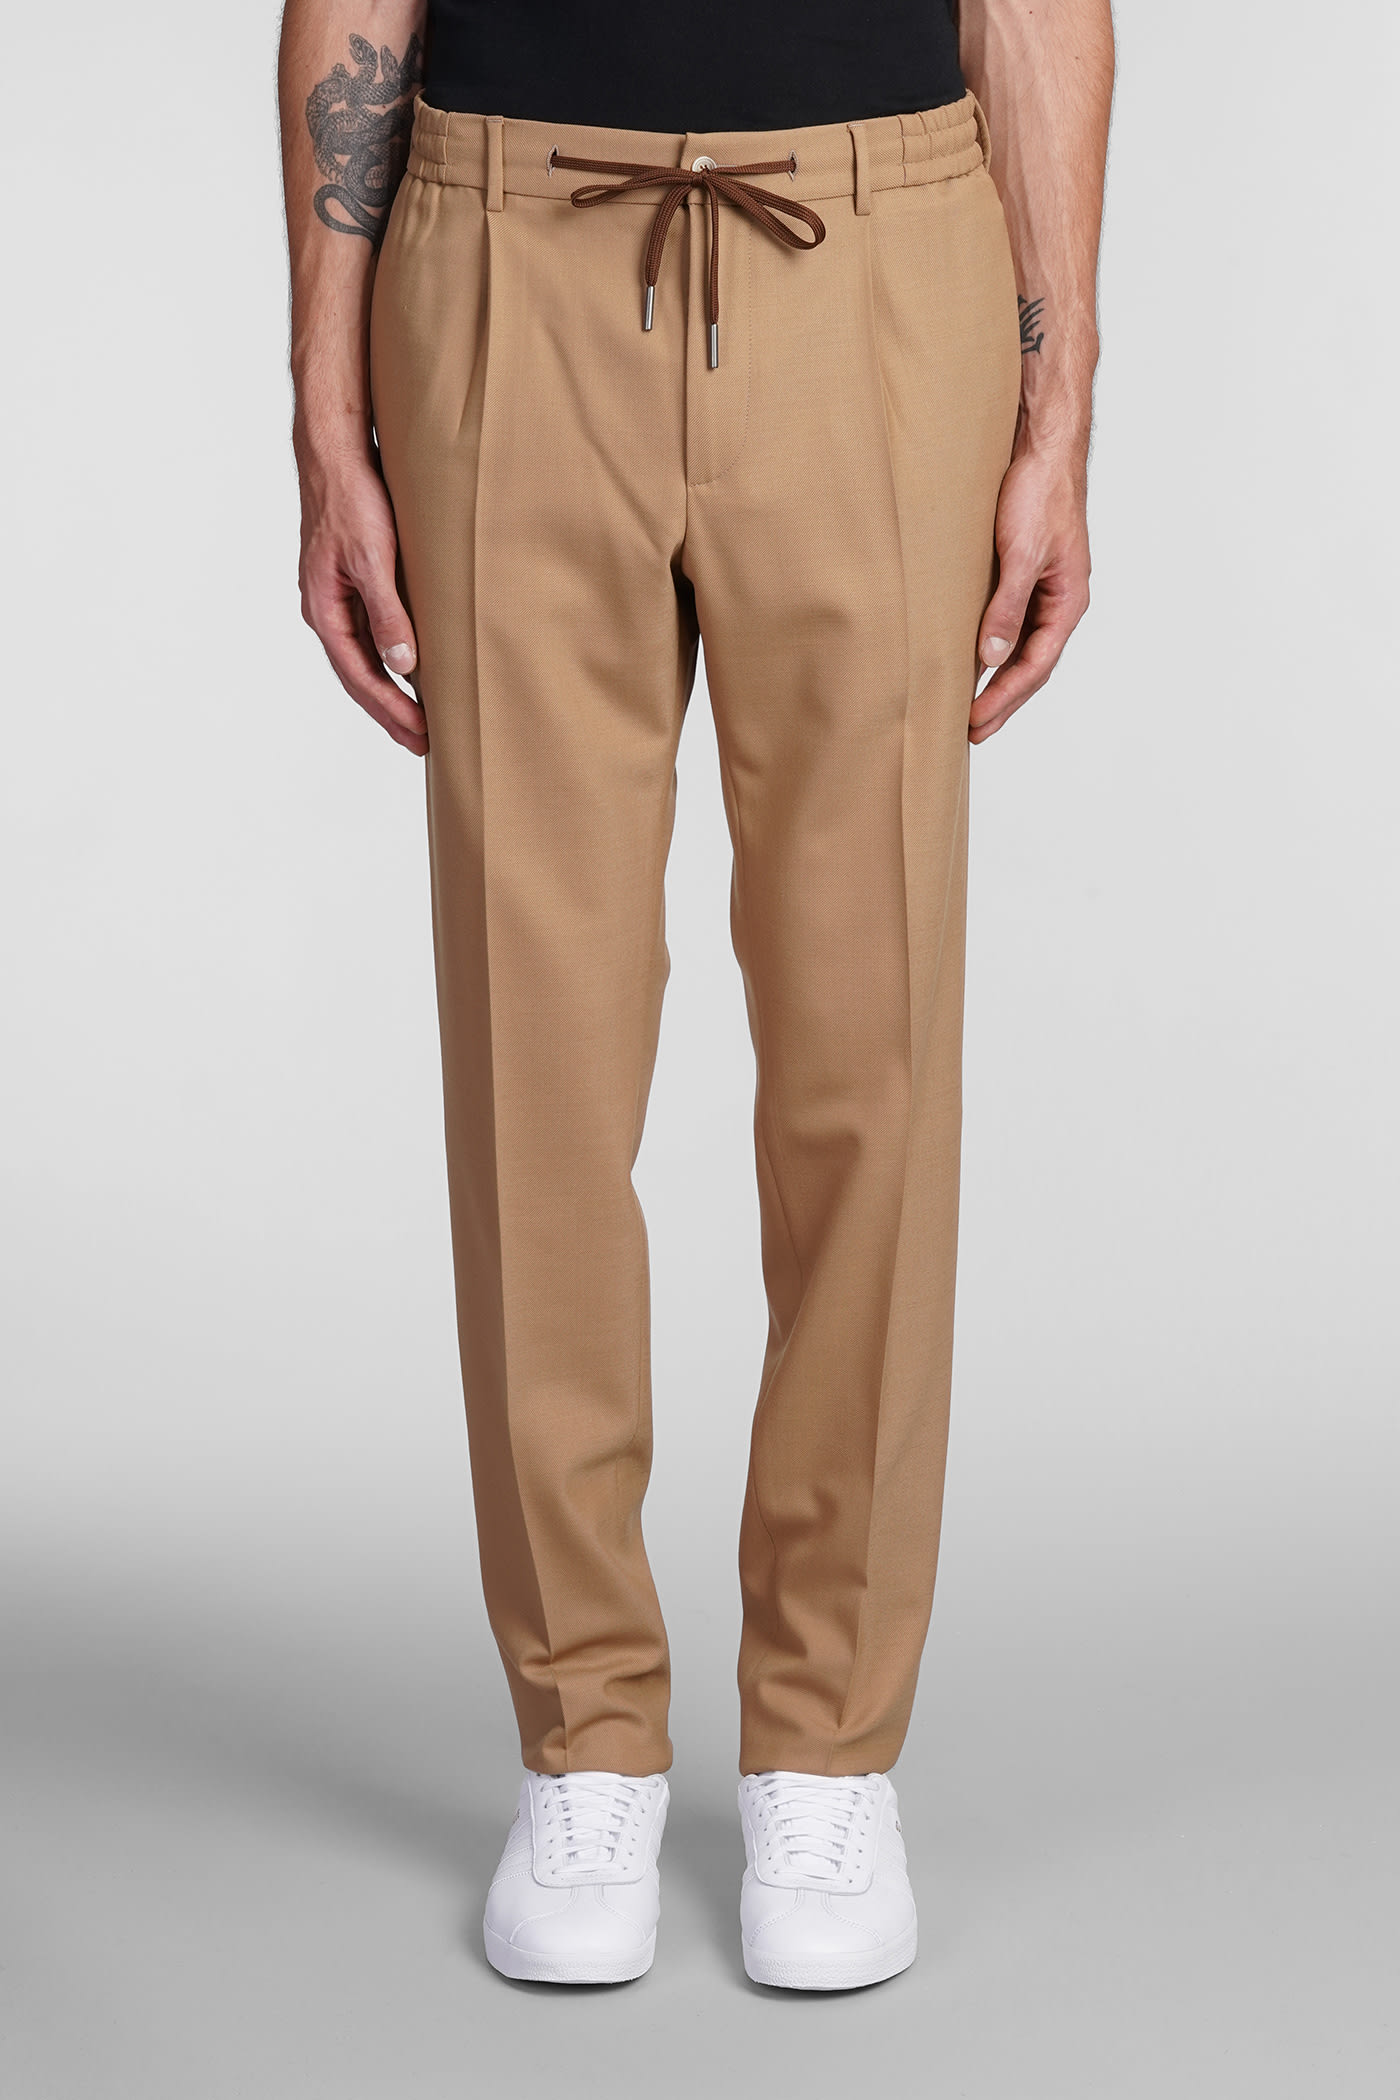 Tagliatore Pants In Camel Polyester